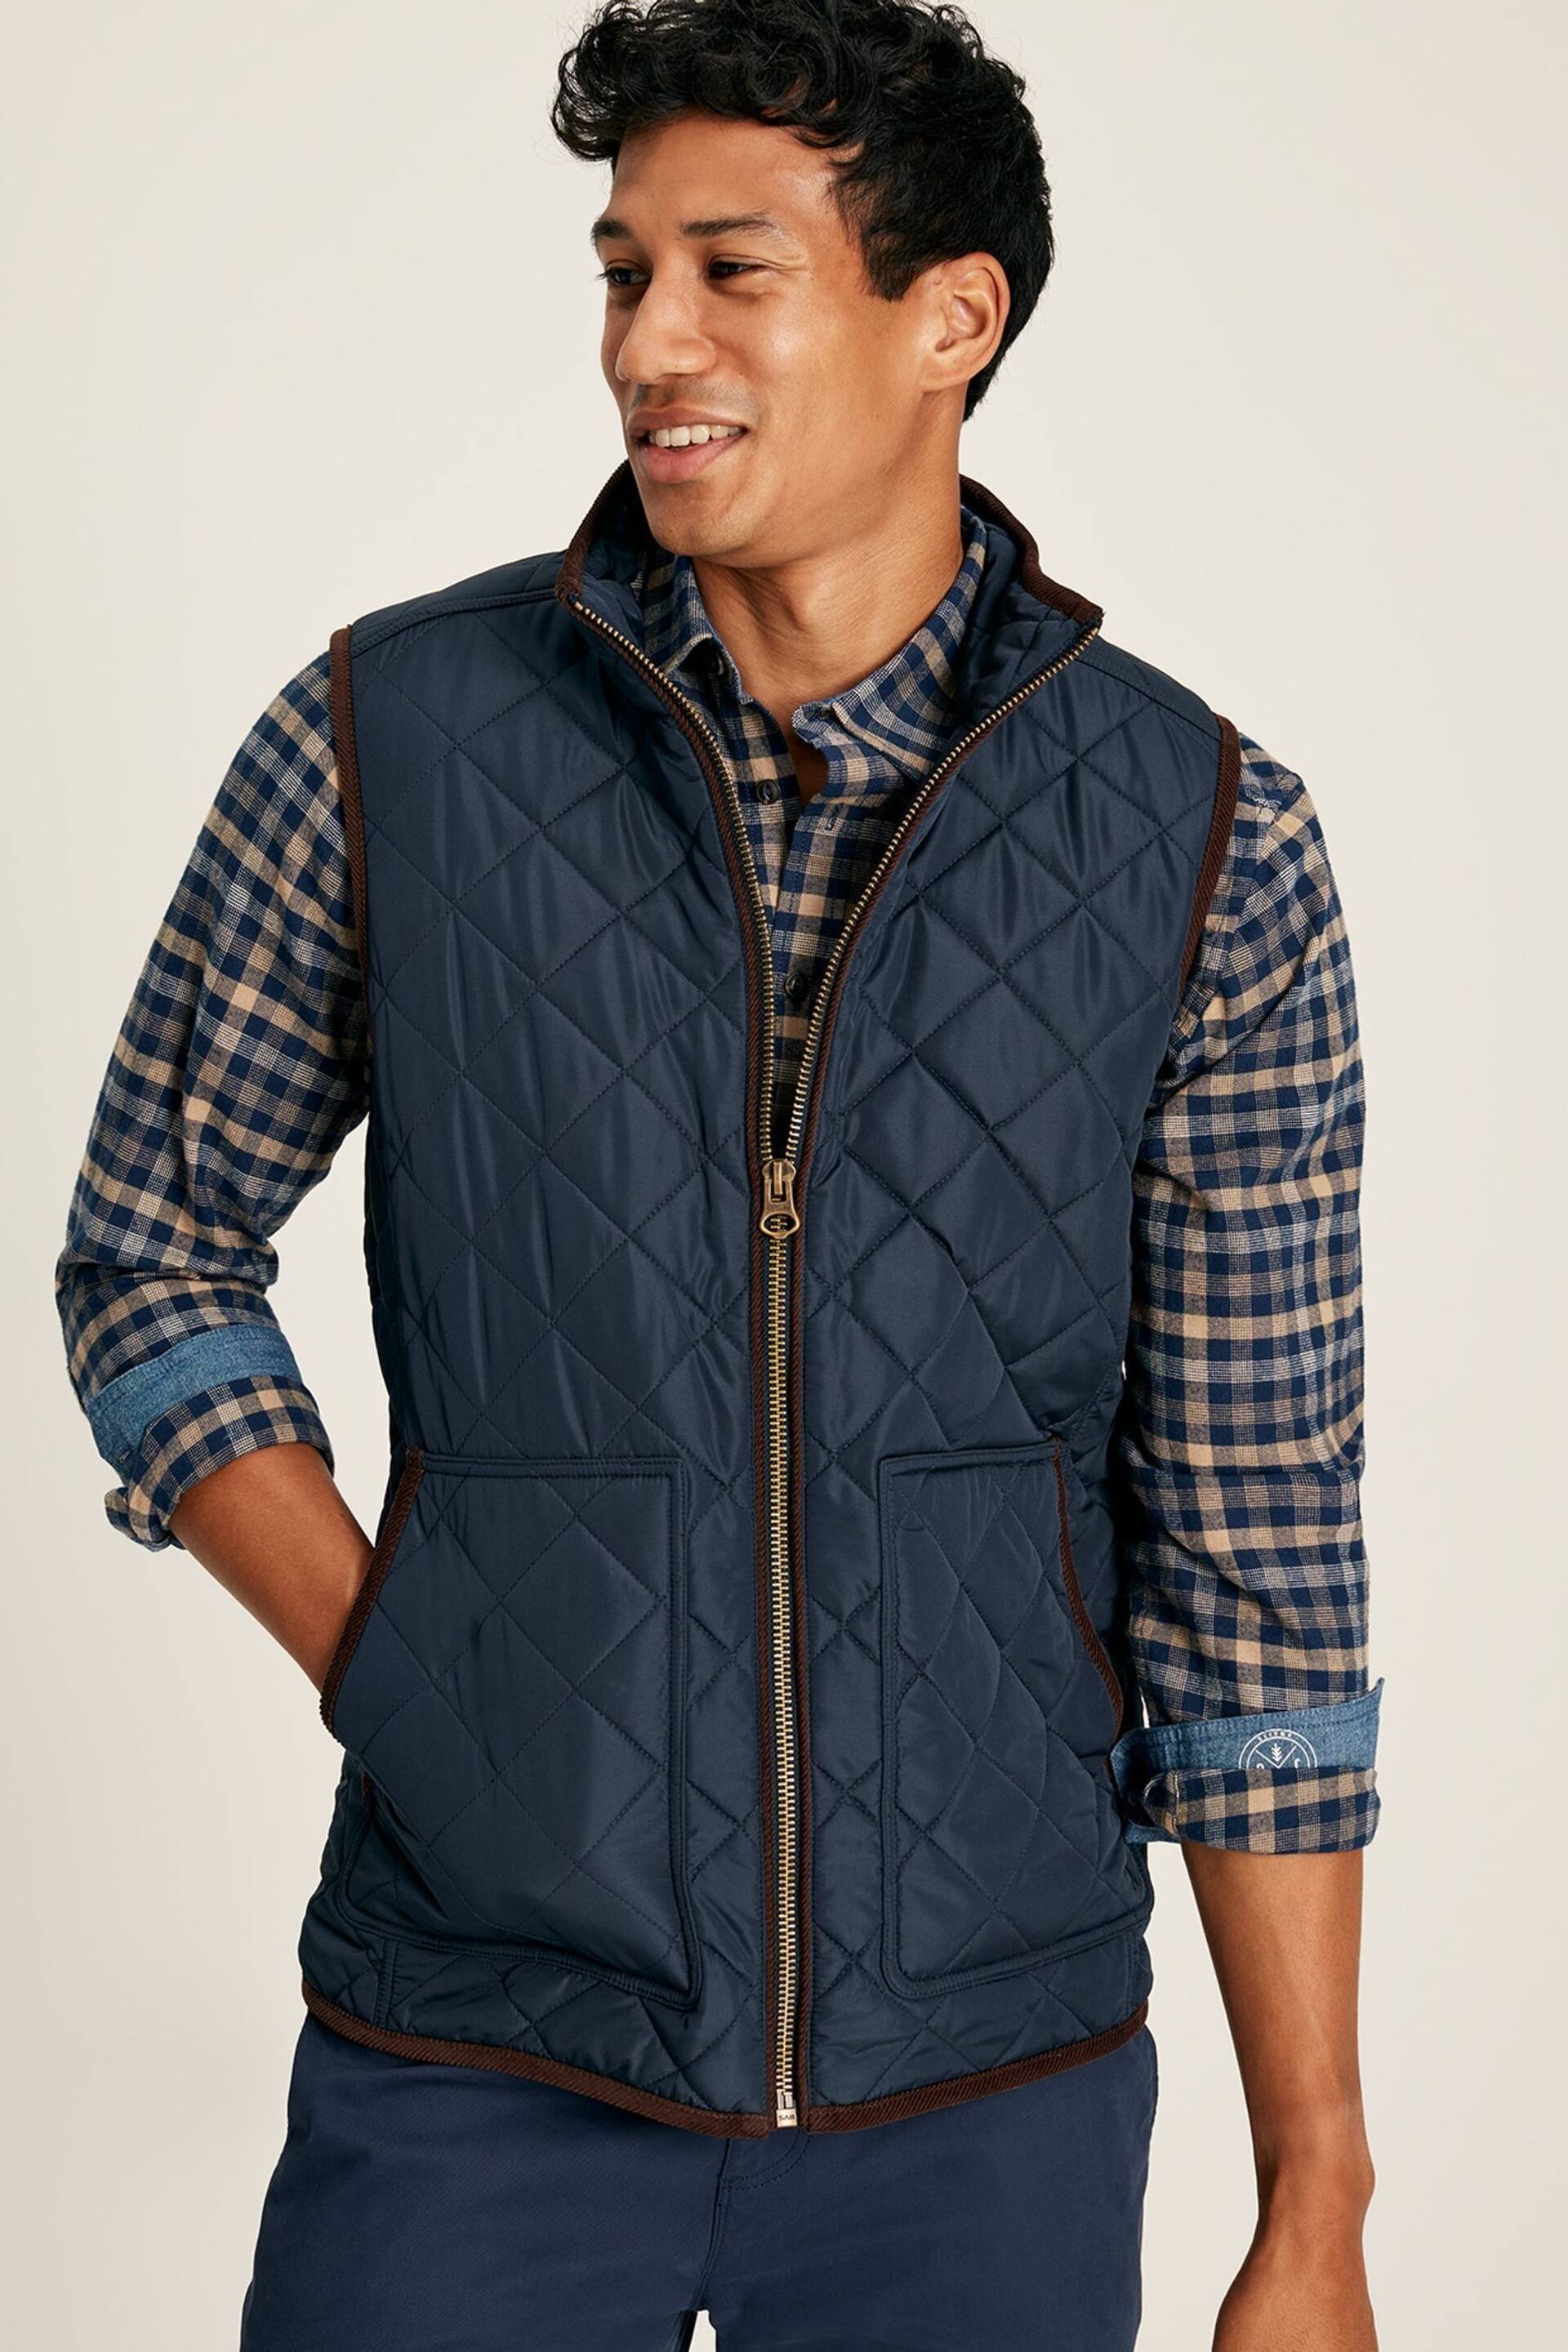 Joules Maynard Navy Blue Diamond Quilted Gilet - Image 1 of 7